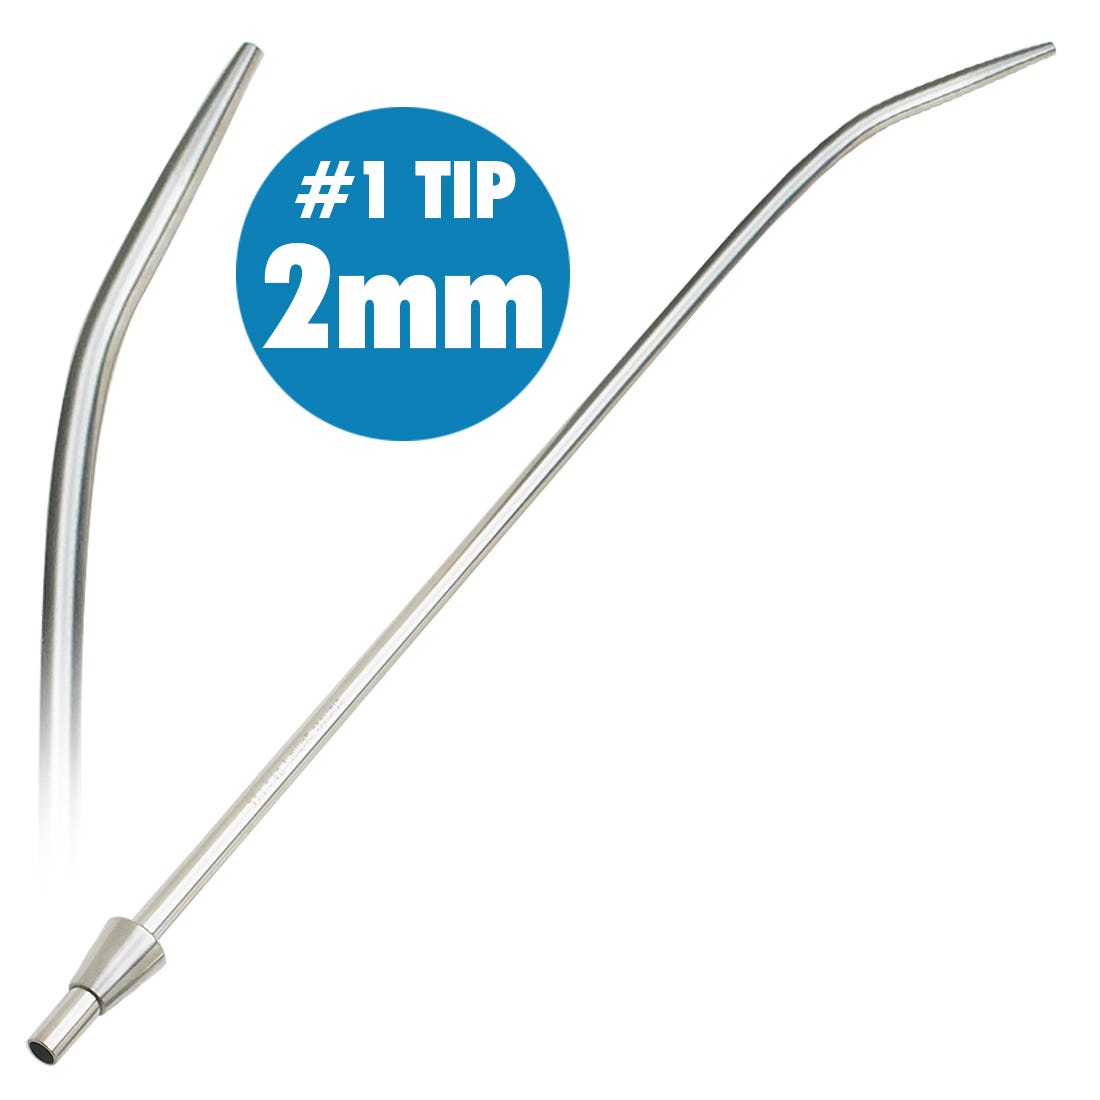 Suction Tip Size 1, 2mm opening